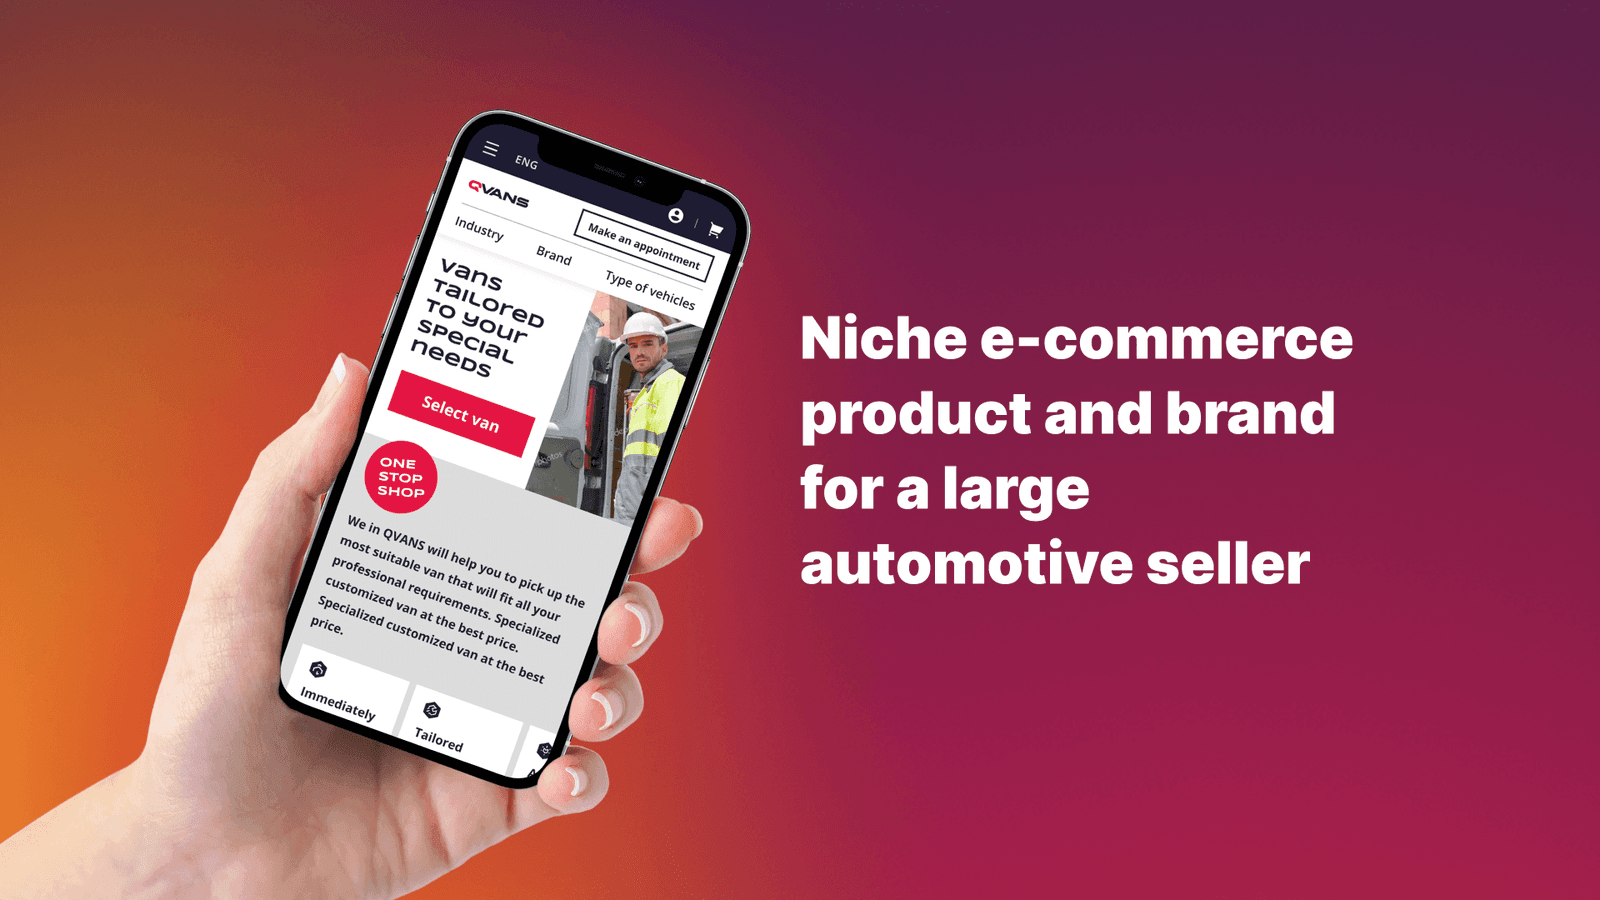 Niche e-commerce automotive product from scratch in 4 months by Artkai team